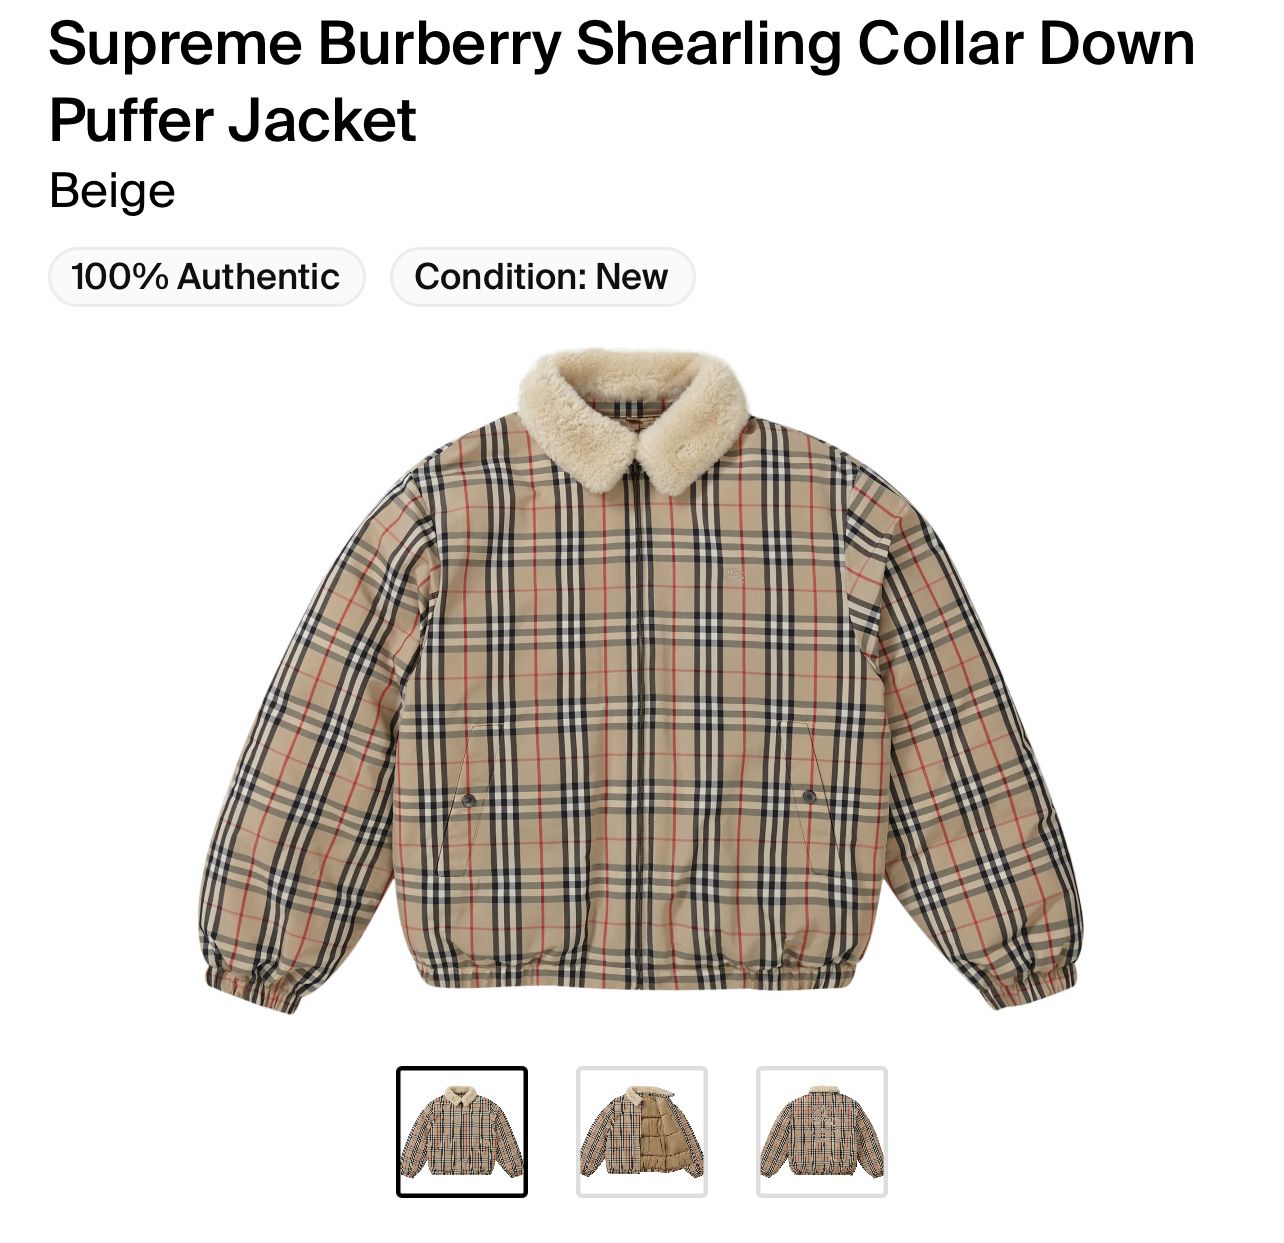 Supreme Burberry Shearling Collar Down Puffer Jacket